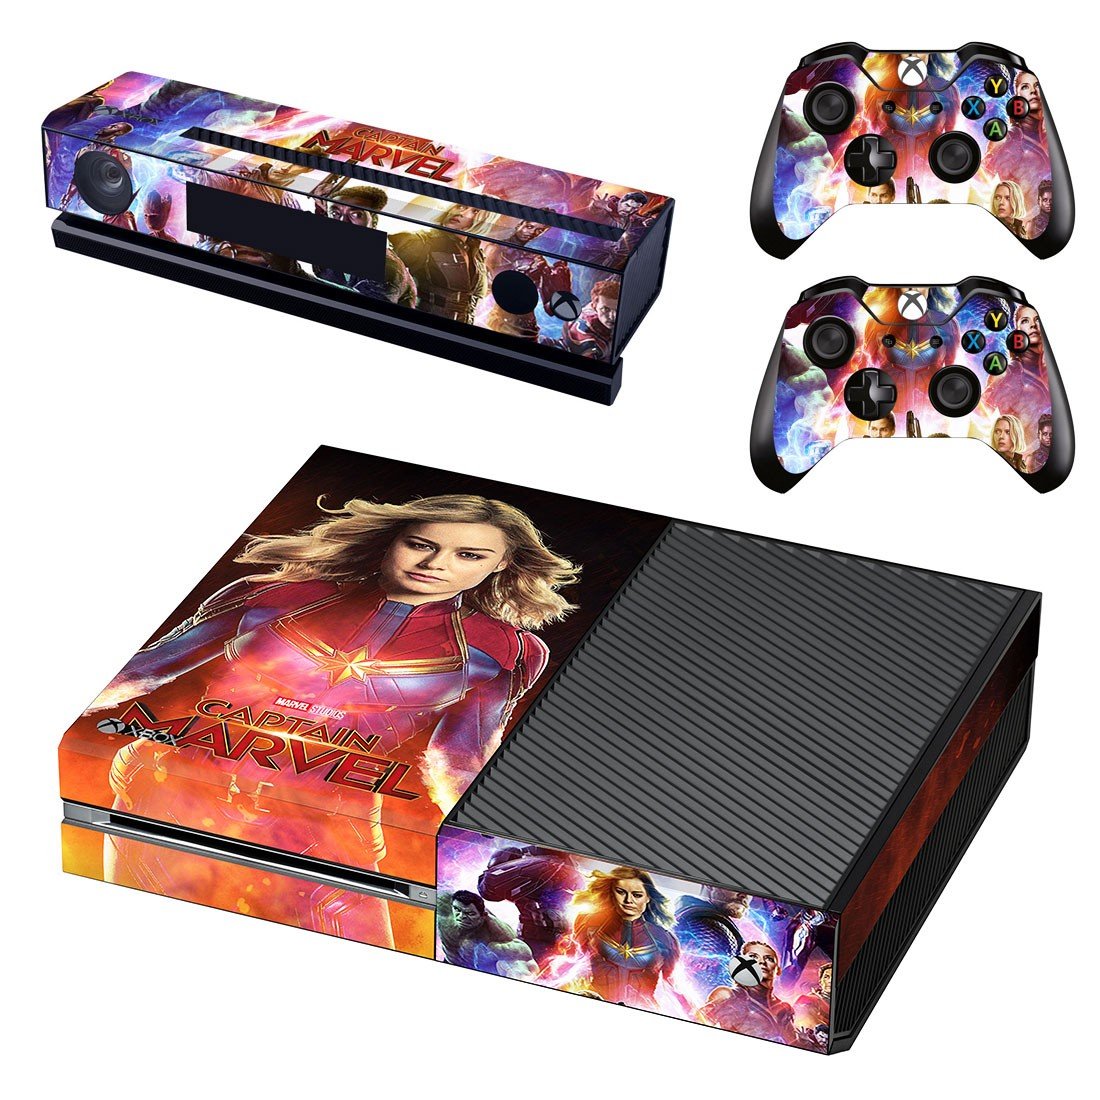 Xbox One Skin Cover - Supergirl